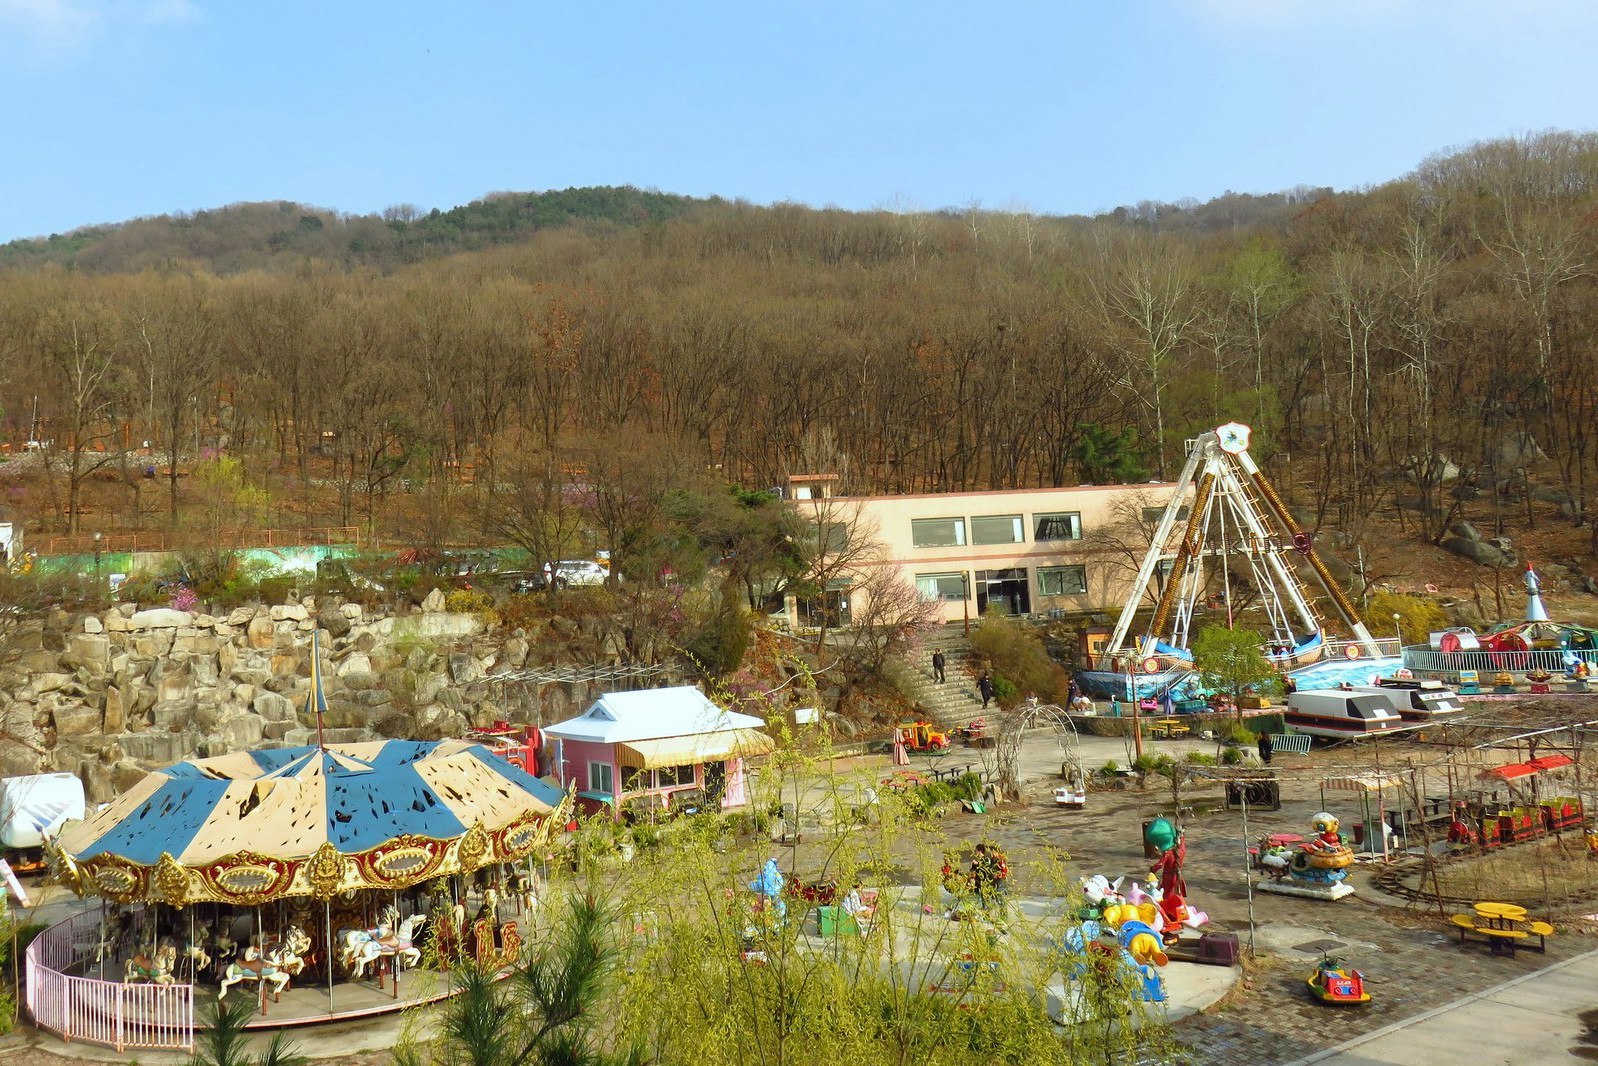 Yongma Land: abandoned amusement park near Seoul. Image by Phillip Tang / Lonely Planet